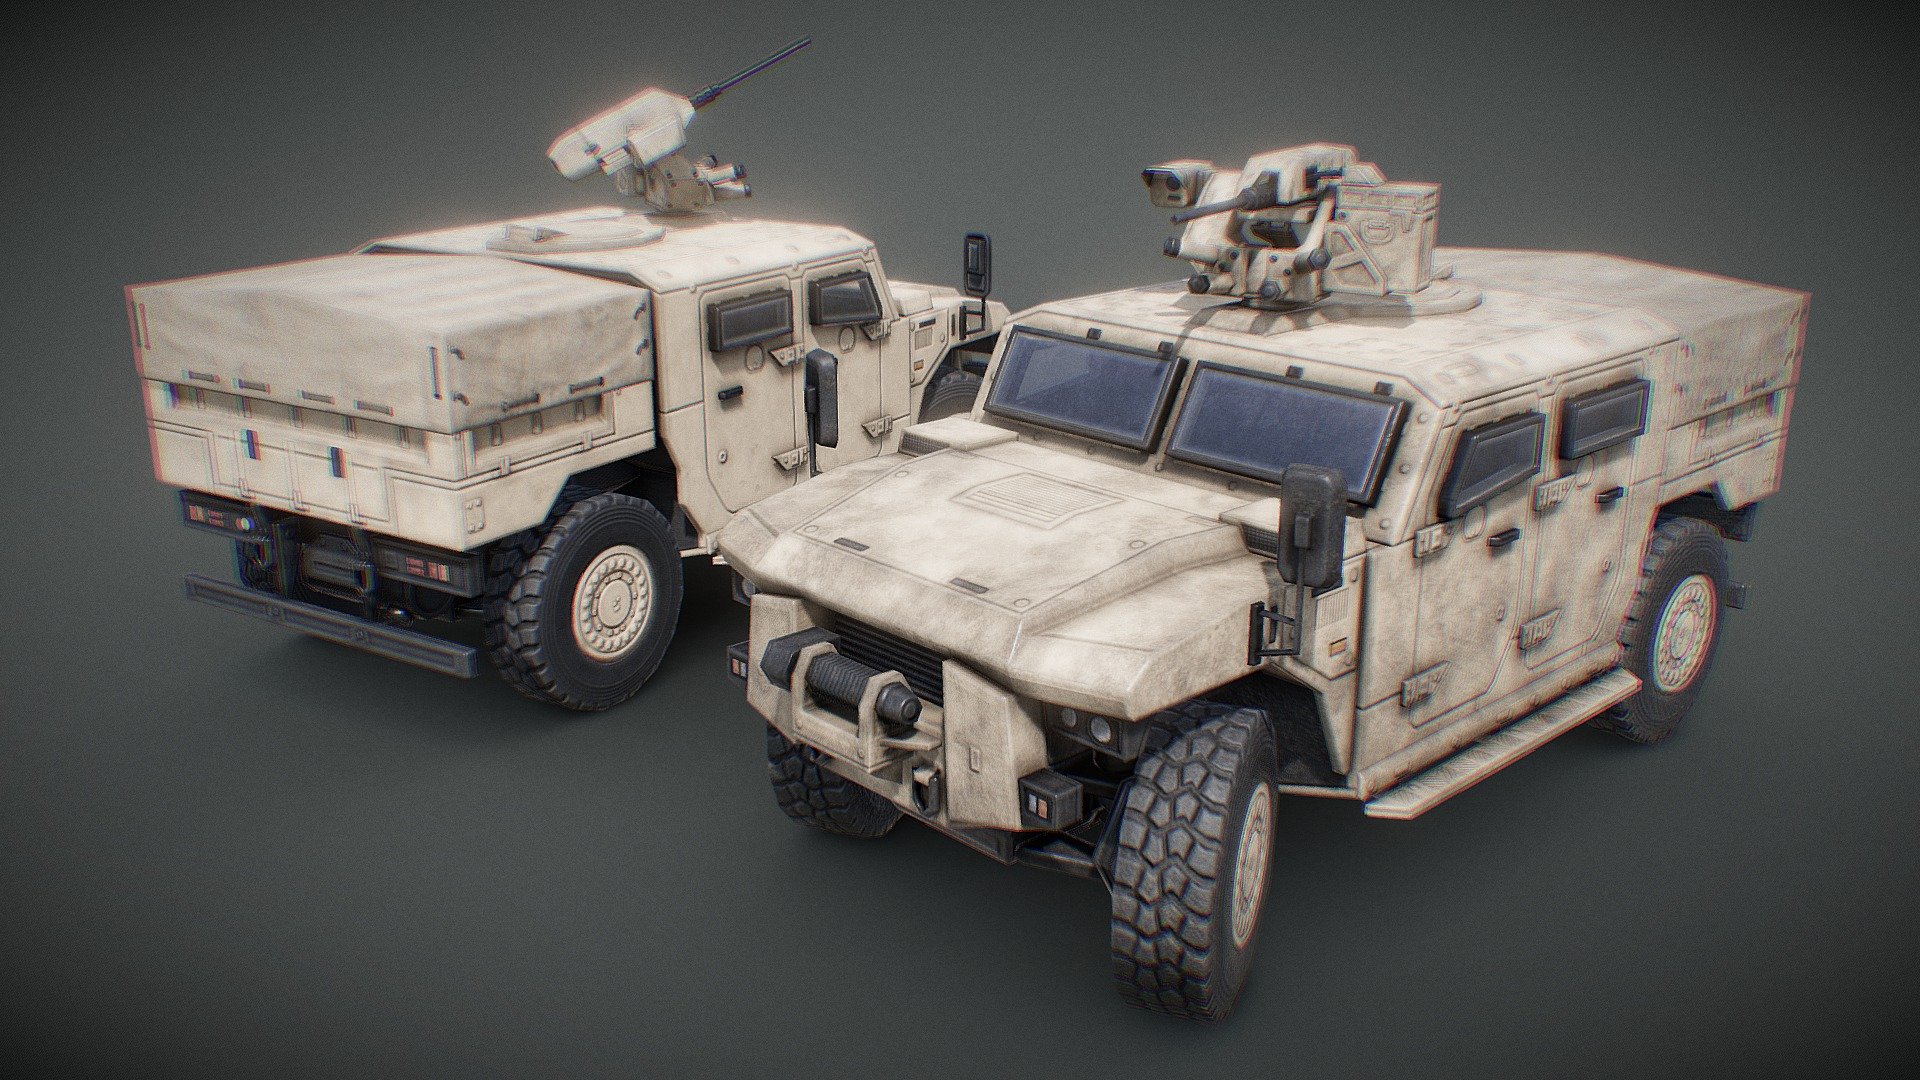 RENAULT SHERPA TENT RWS HERSTAL (DESERT CAMO)
Low-Poly model for the game and VFX

Textures 2048,1024 (Normal,AO,Diffuse,Roughness)
Tris 3,415

https://boosty.to/tsb3dmodels - RENAULT SHERPA TENT RWS HERSTAL (DESERT CAMO) - 3D model by TSB3DMODELS 3d model